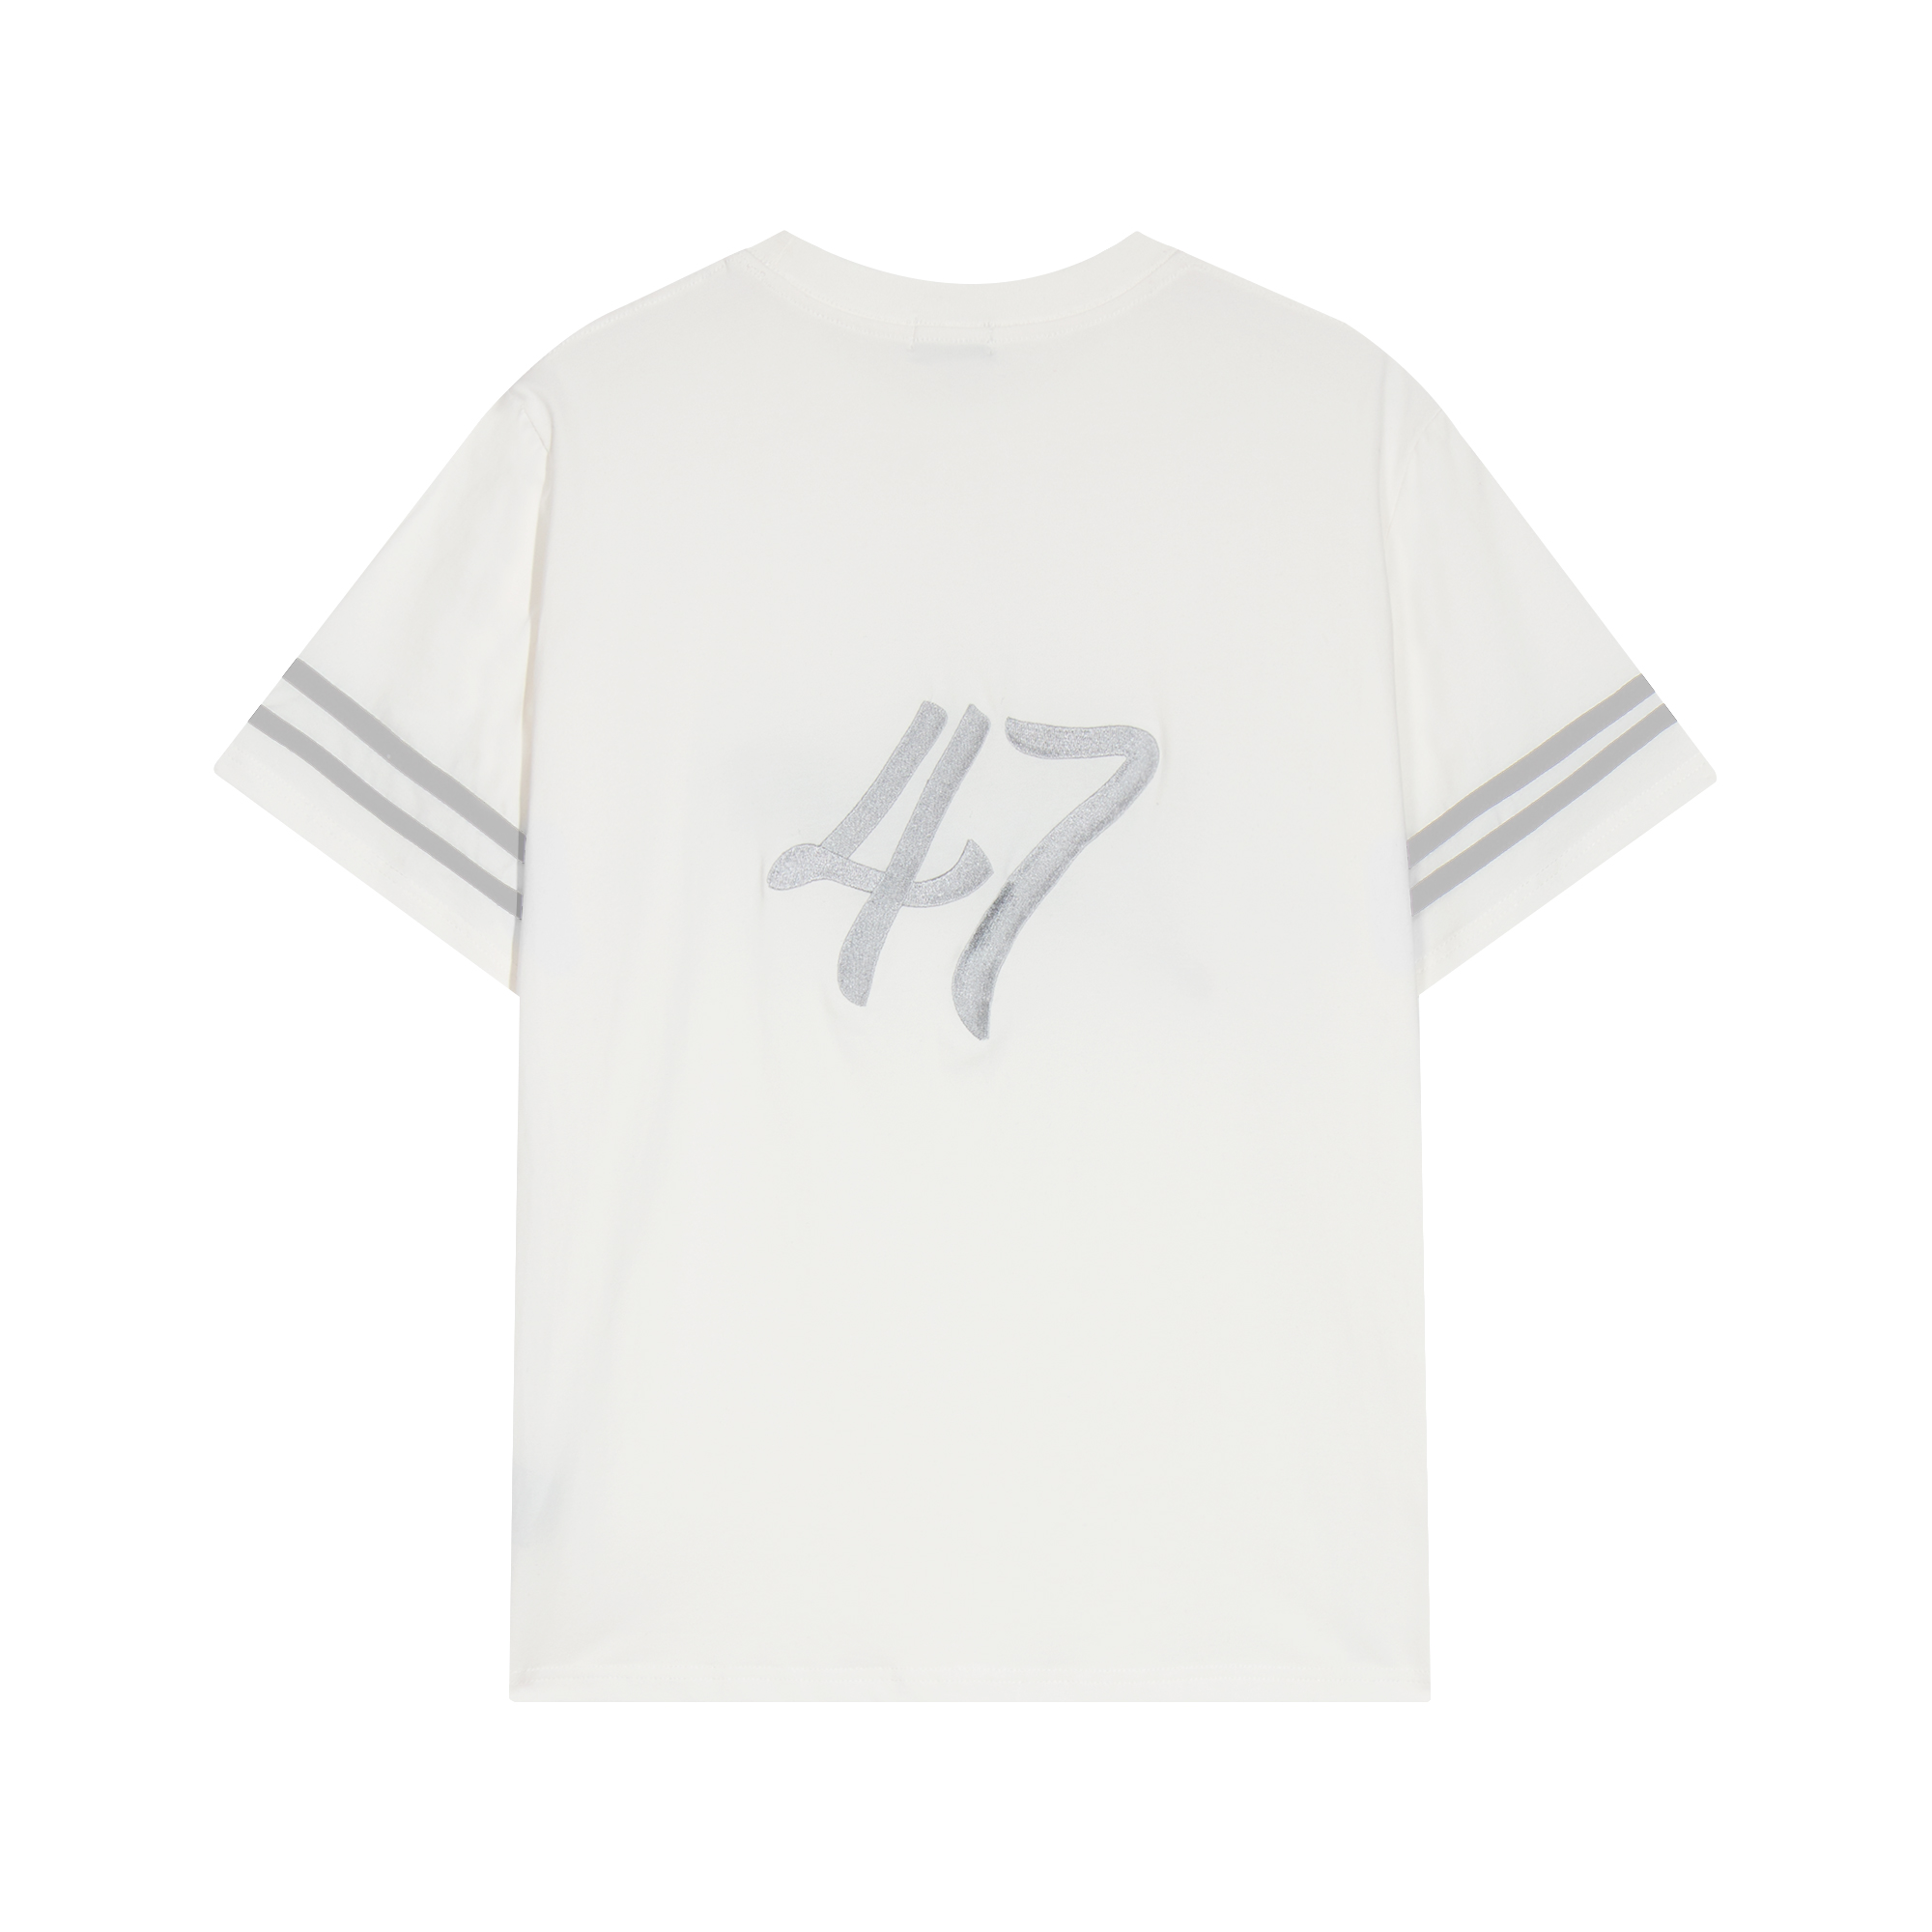 Dior Short Sleeve T Shirts Unisex # 264485, cheap Dior T Shirts, only $27!